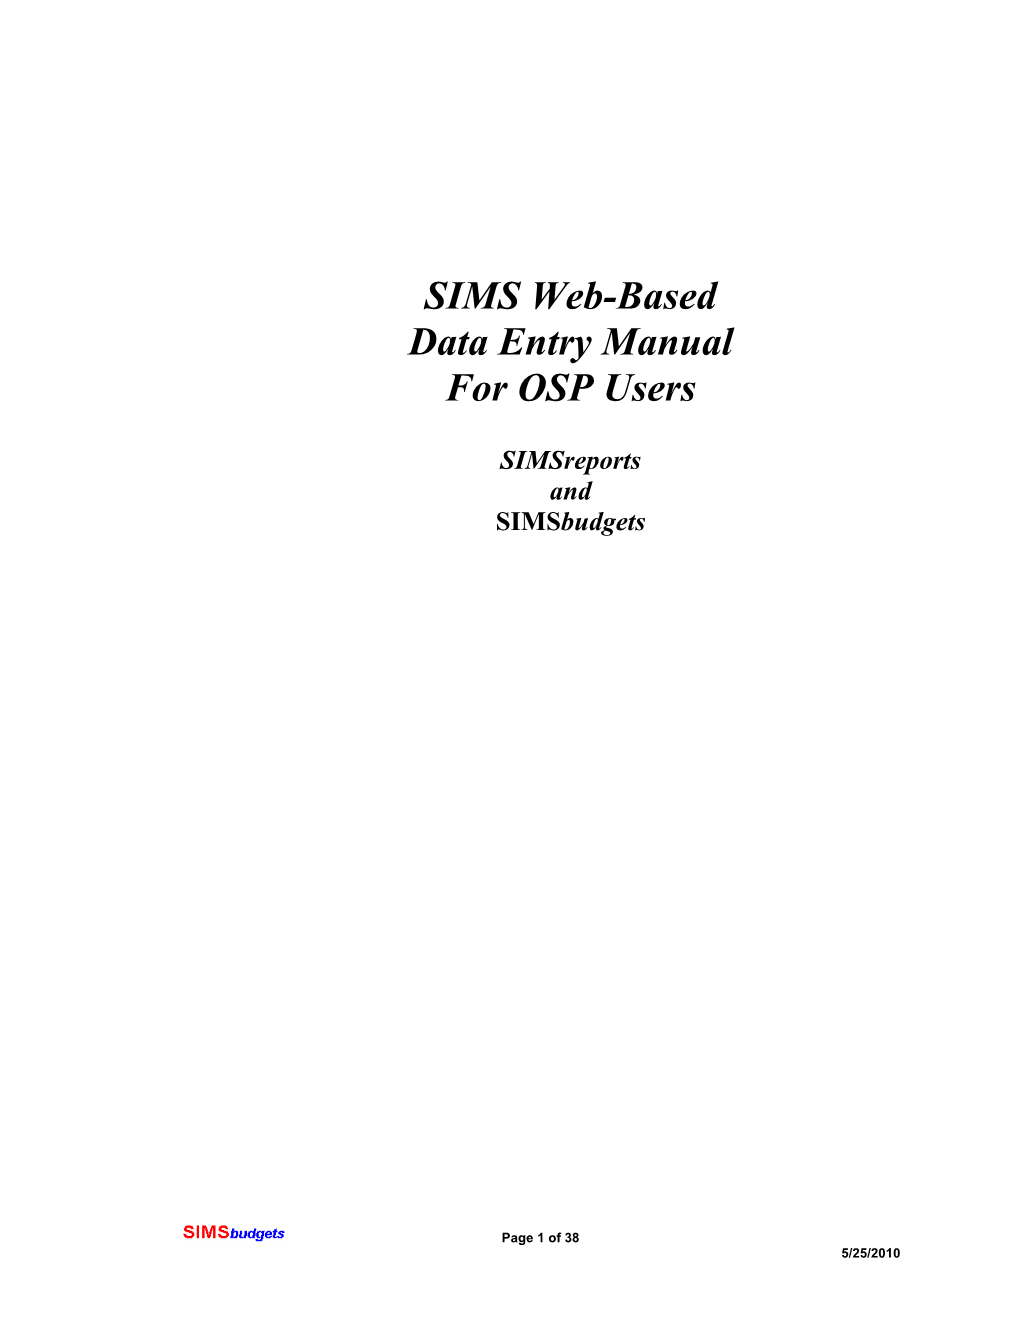 SIMS Web-Based Data Entry Manual for OSP Users